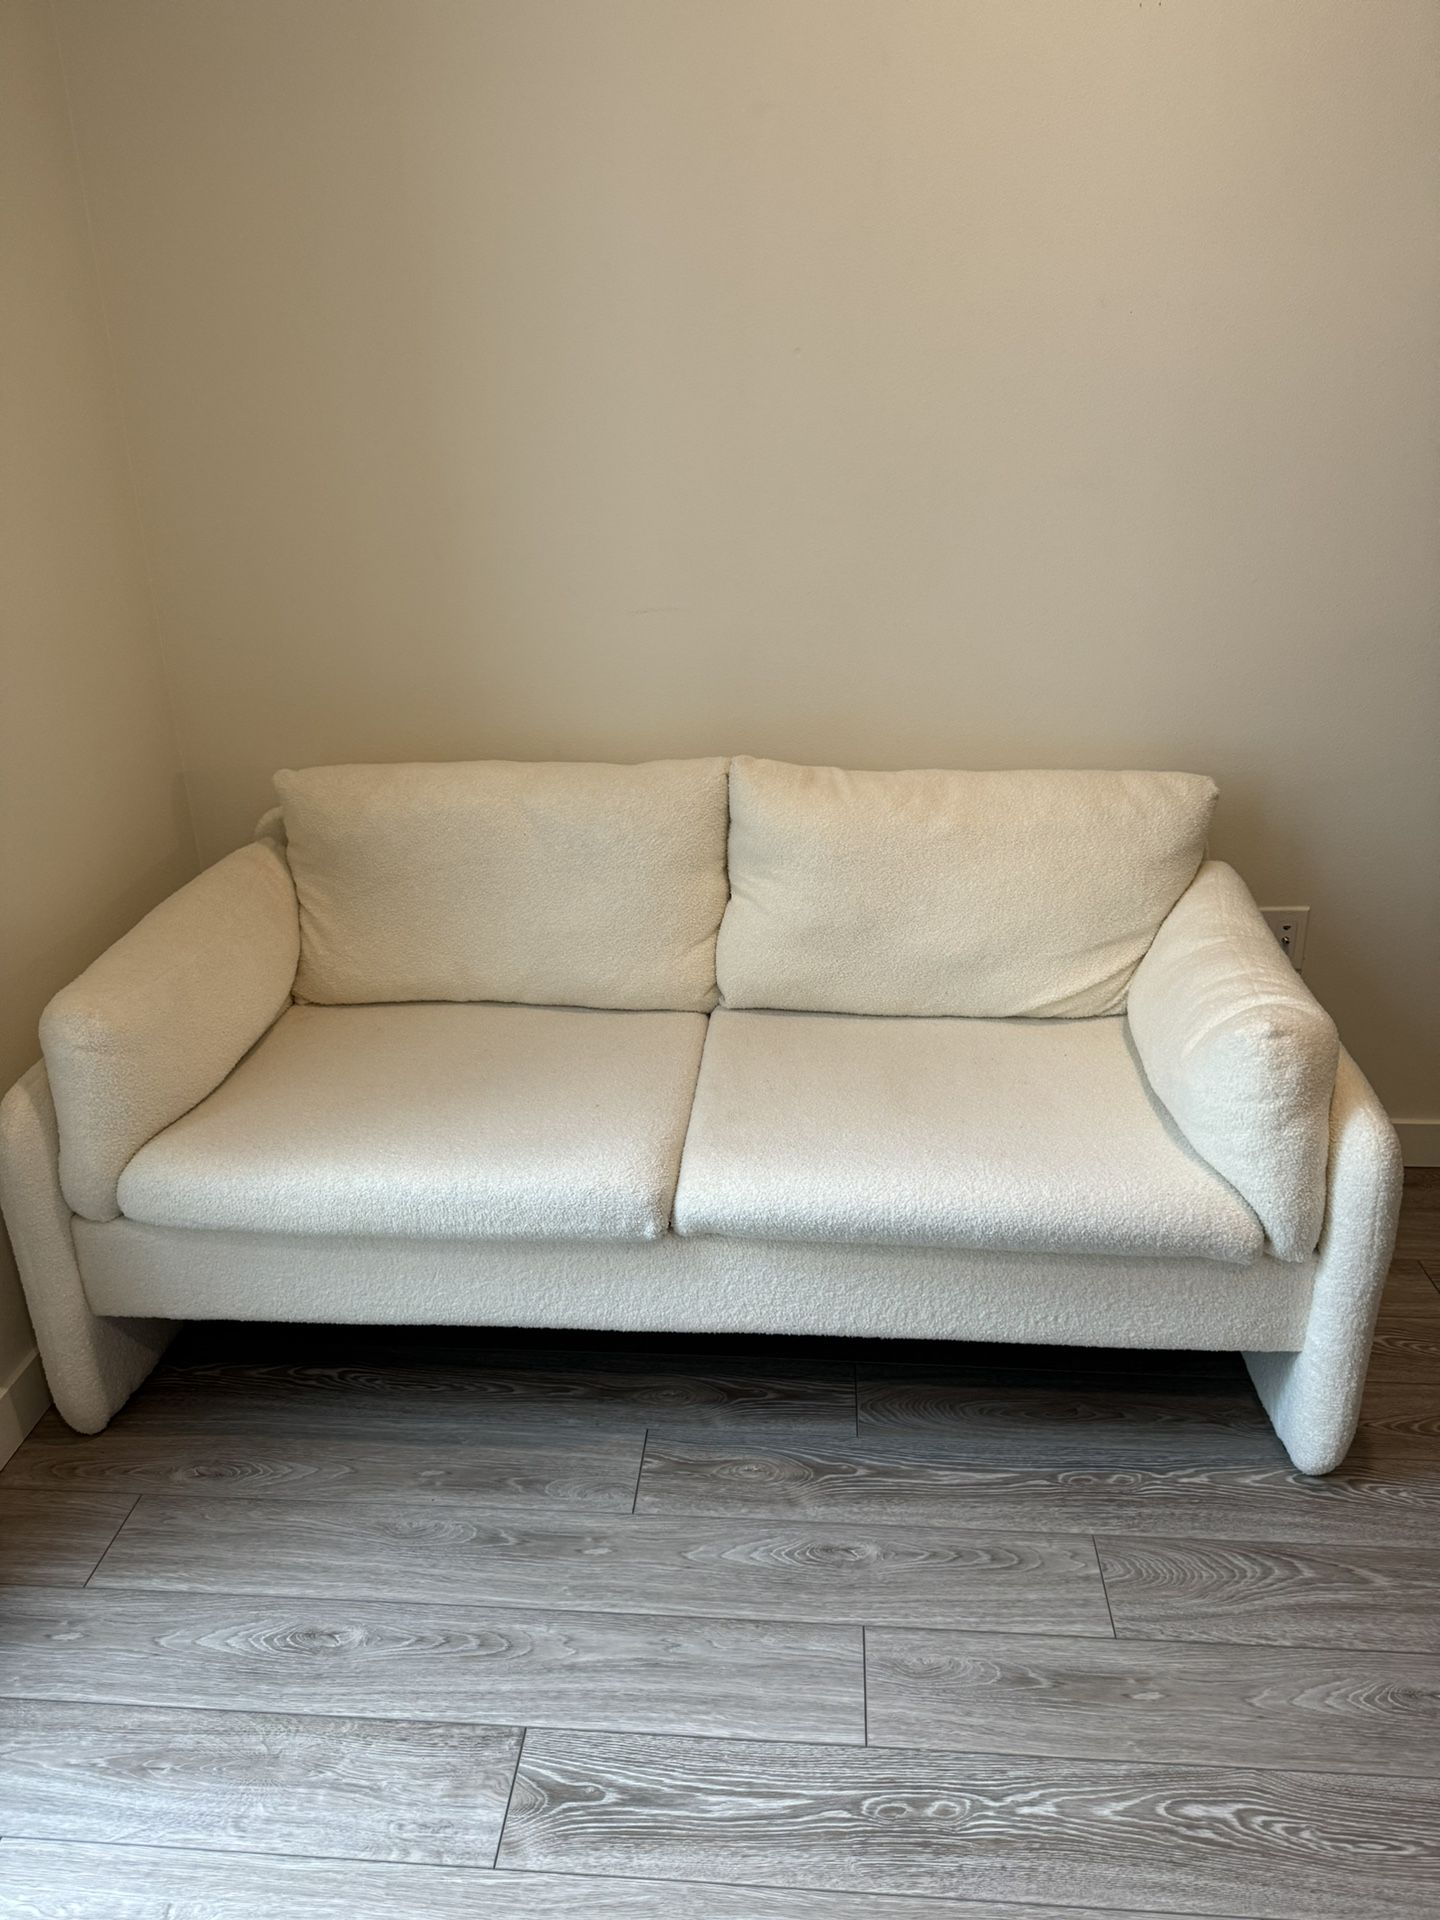 Couch Like new